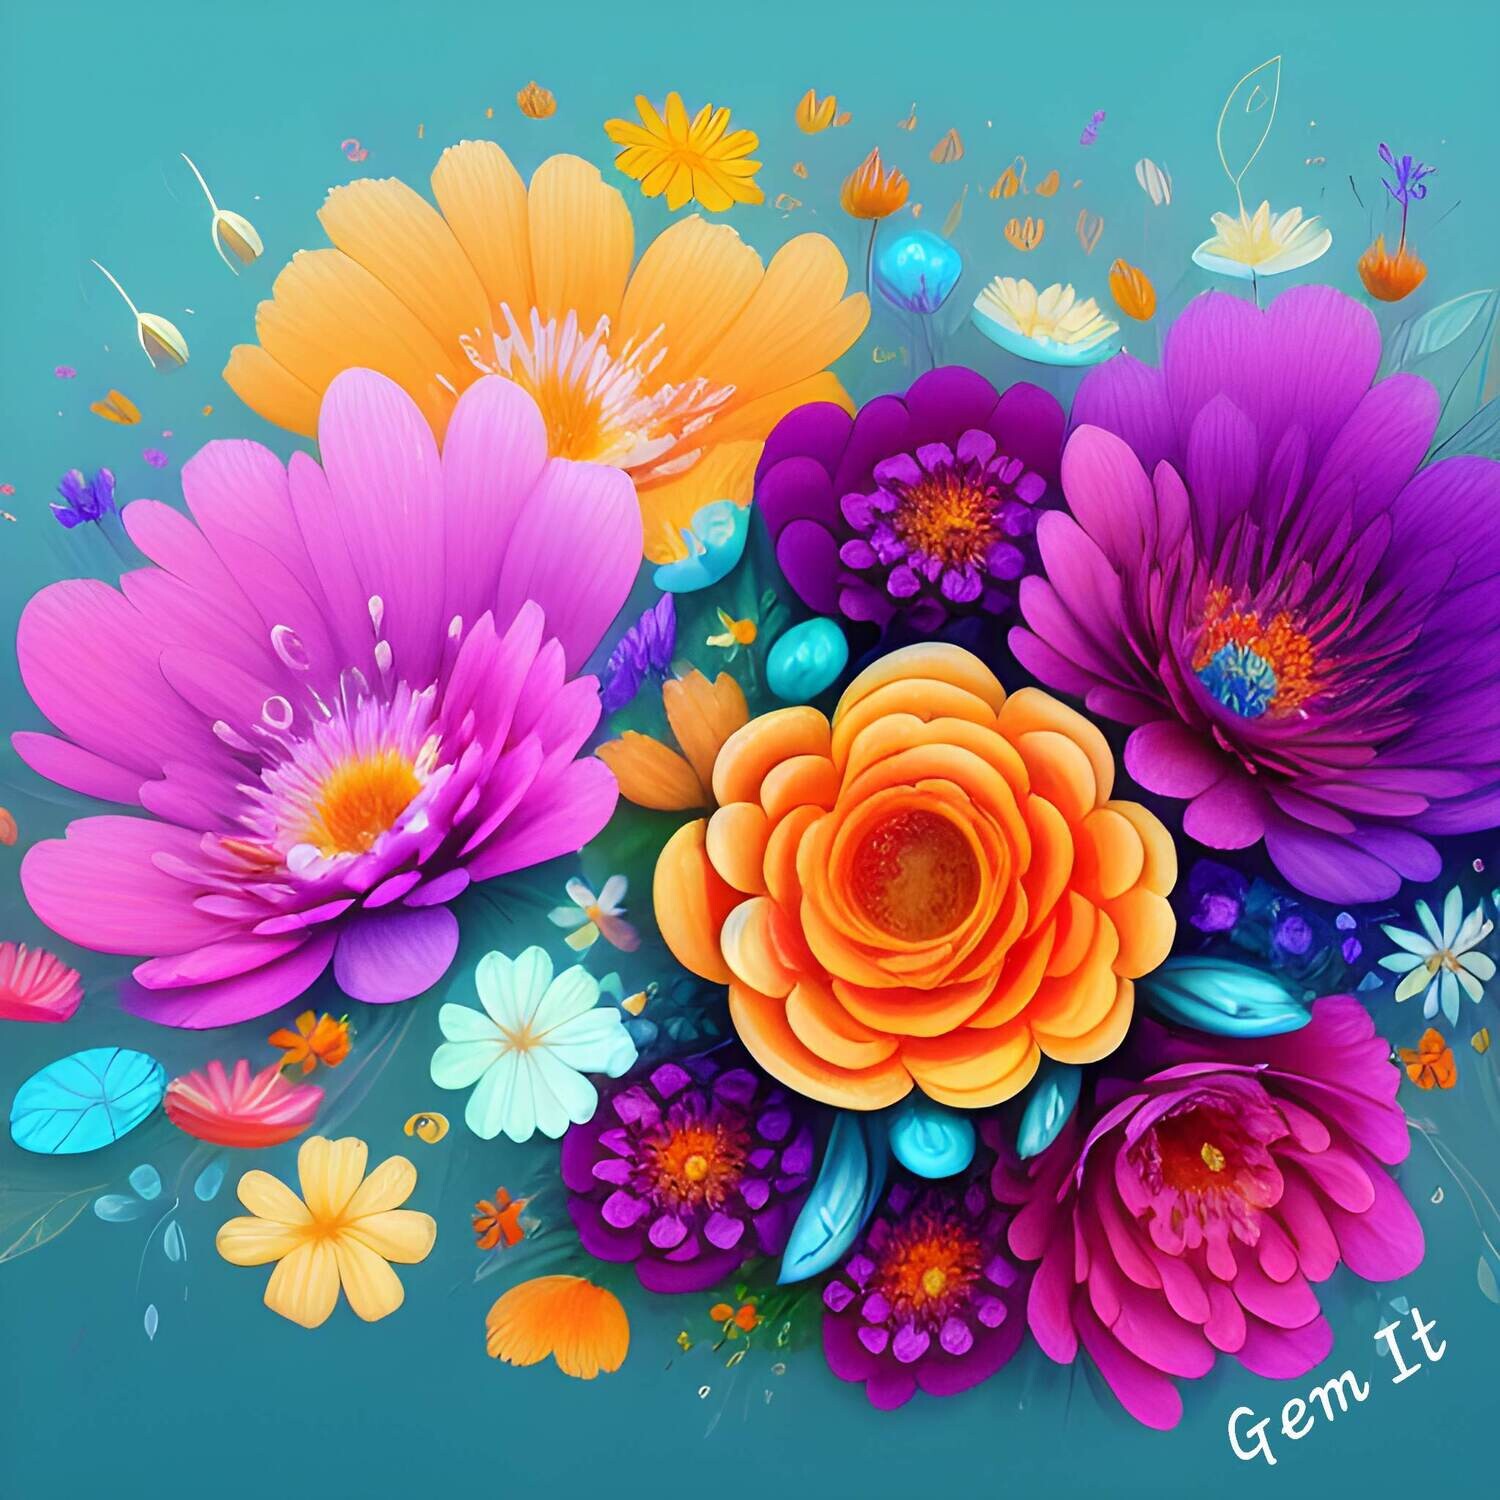 Flowers 797 - Full Drill Diamond Painting - Specially ordered for you. Delivery is approximately 4 - 6 weeks.